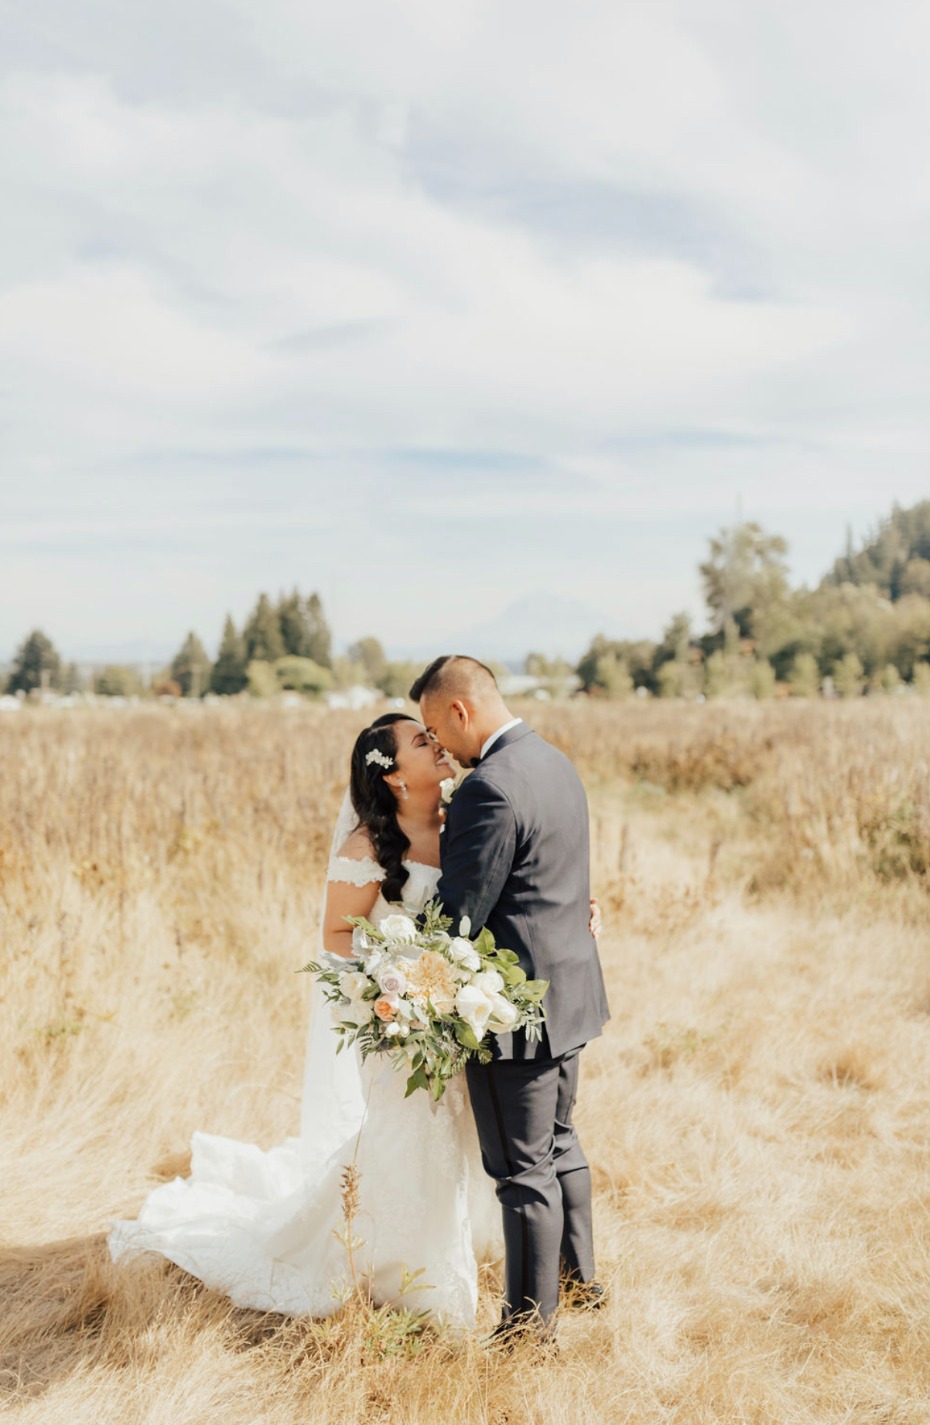 Jessica Vann-Campbell Flowers Is Your Go-To in the PNW for Goosebump-Worthy Flower Goals